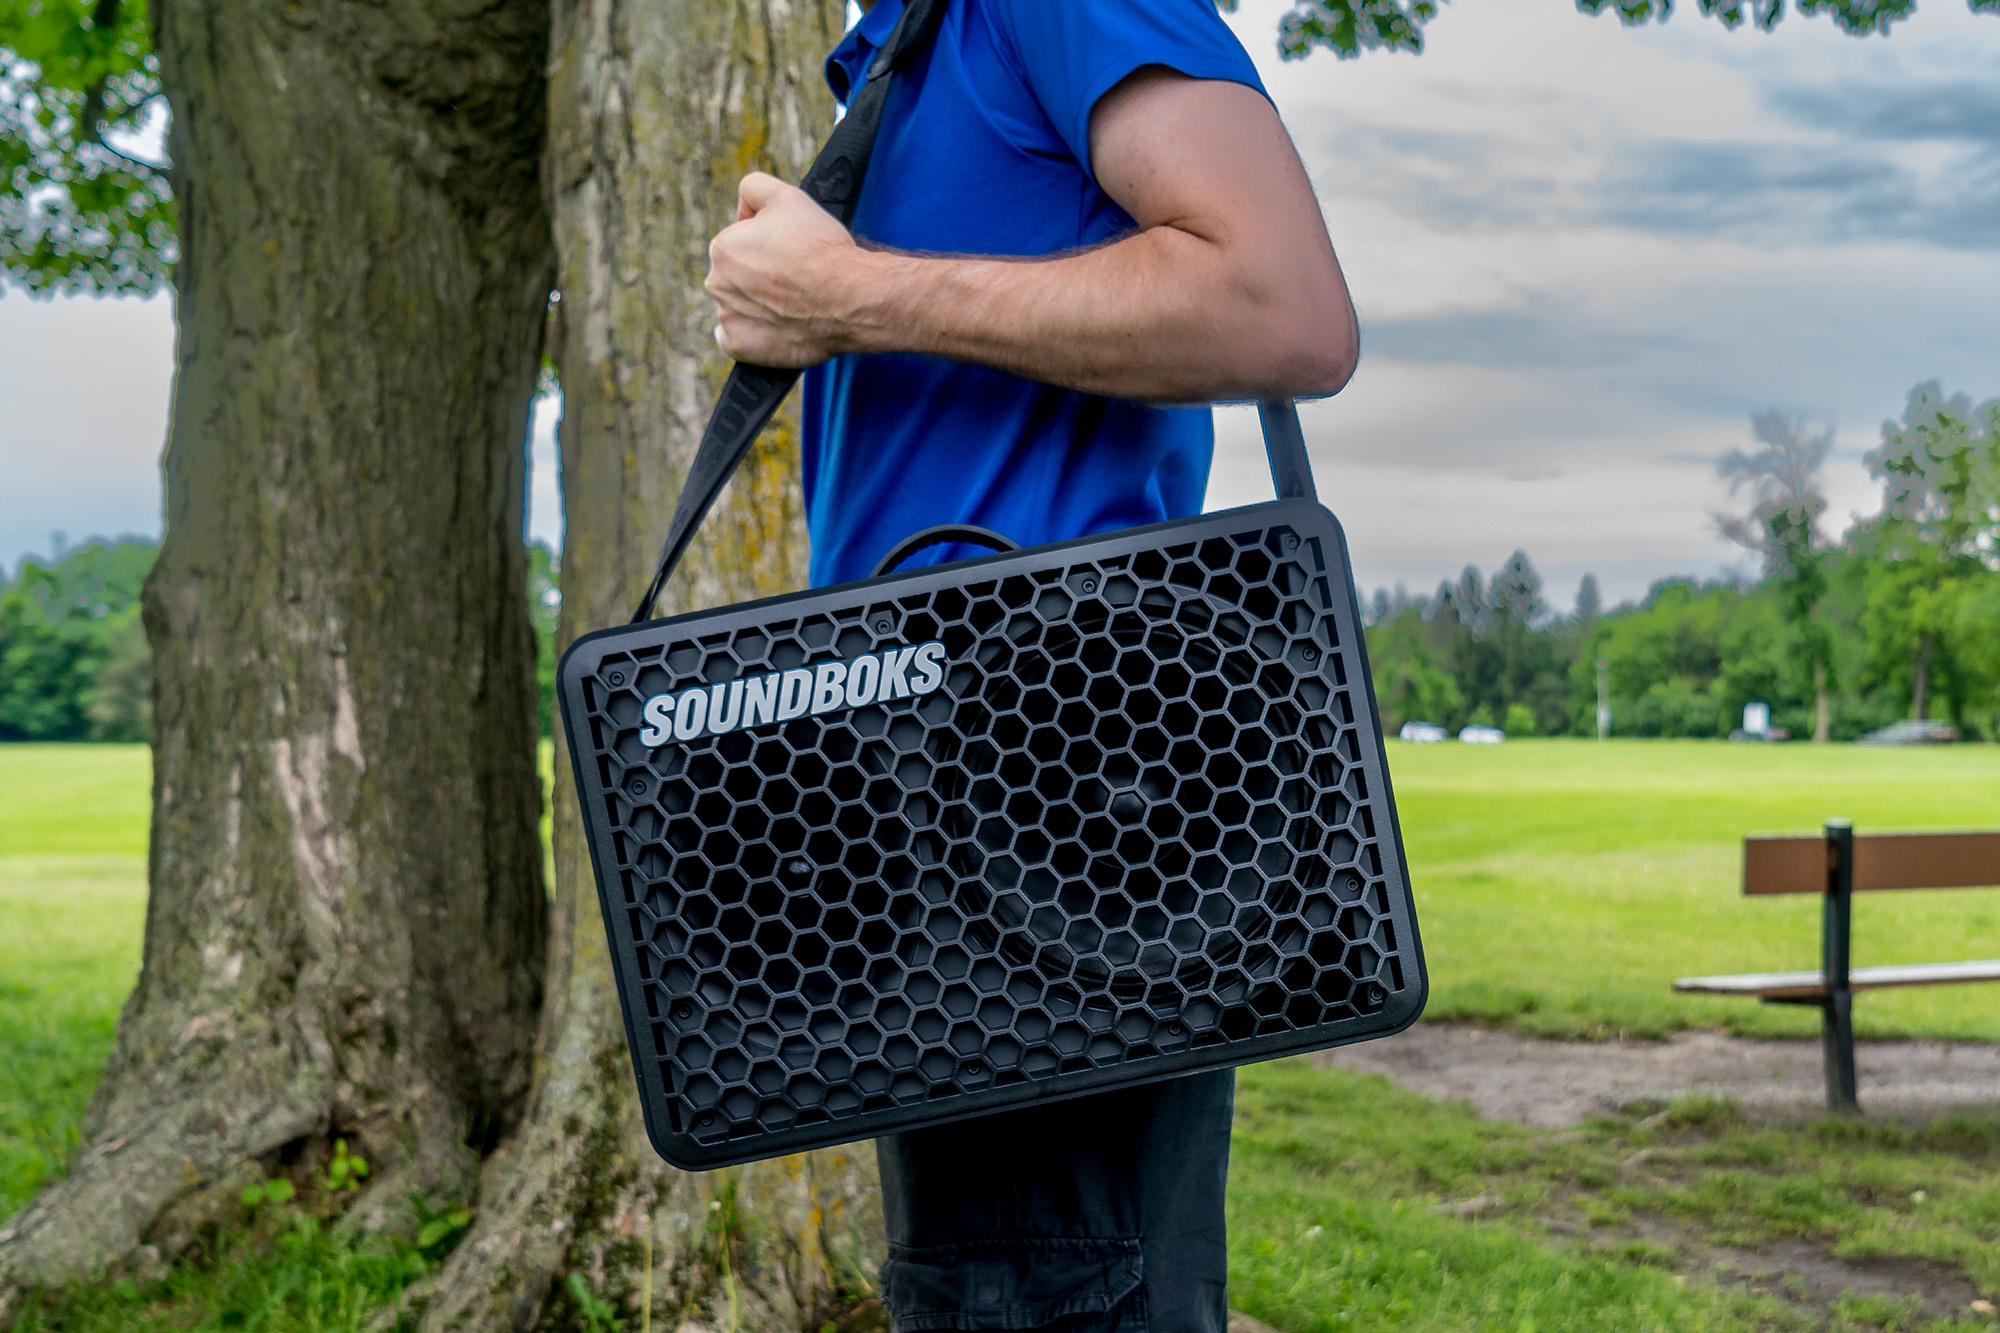 Soundboks Go review: Party time in a box